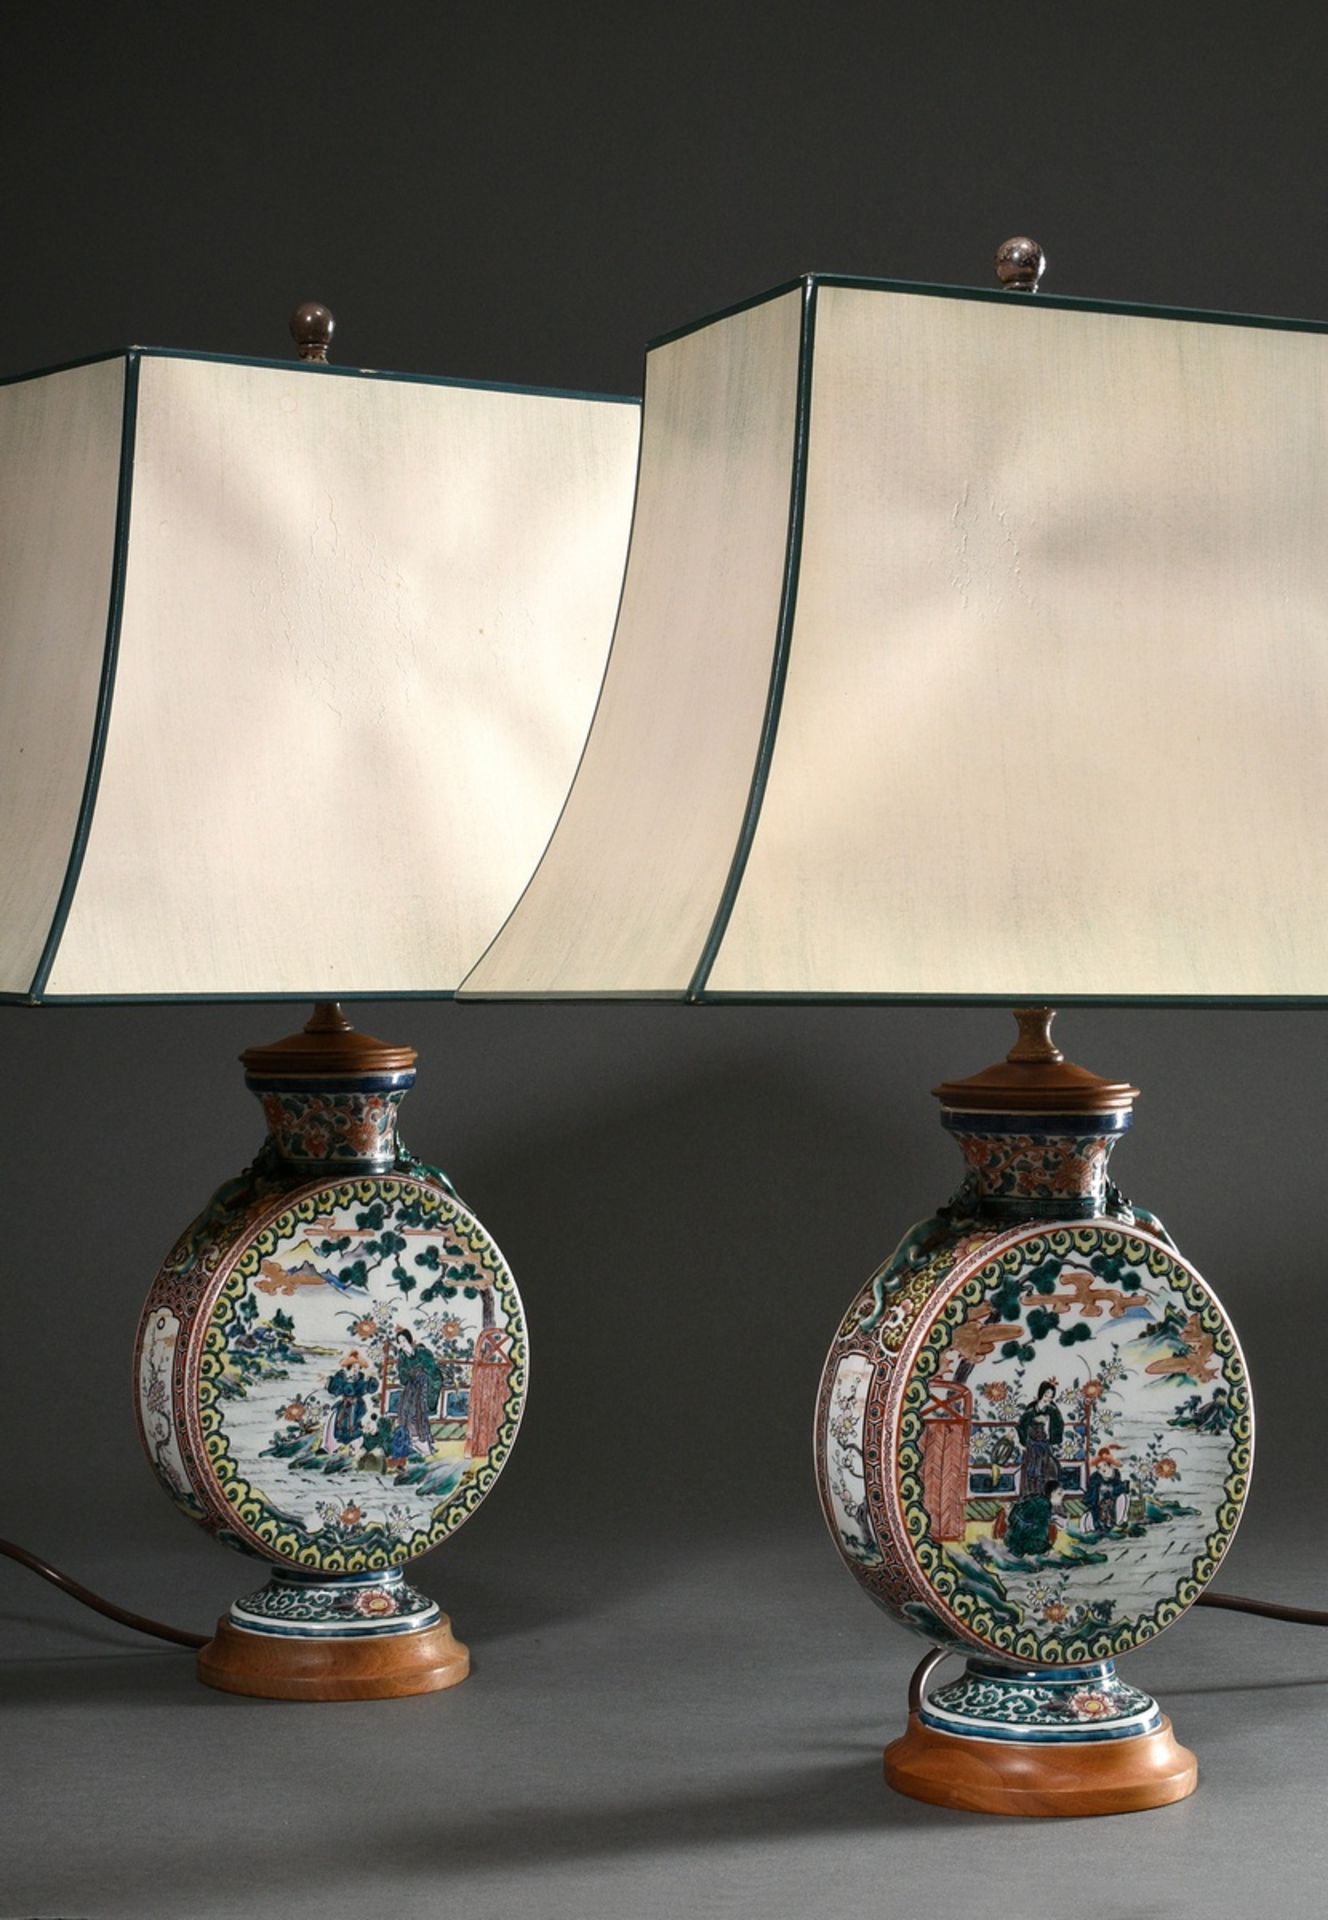 Pair of Japanese Kutani Moonflask vases with polychrome painting "Garden scenes" mounted as lamps, 